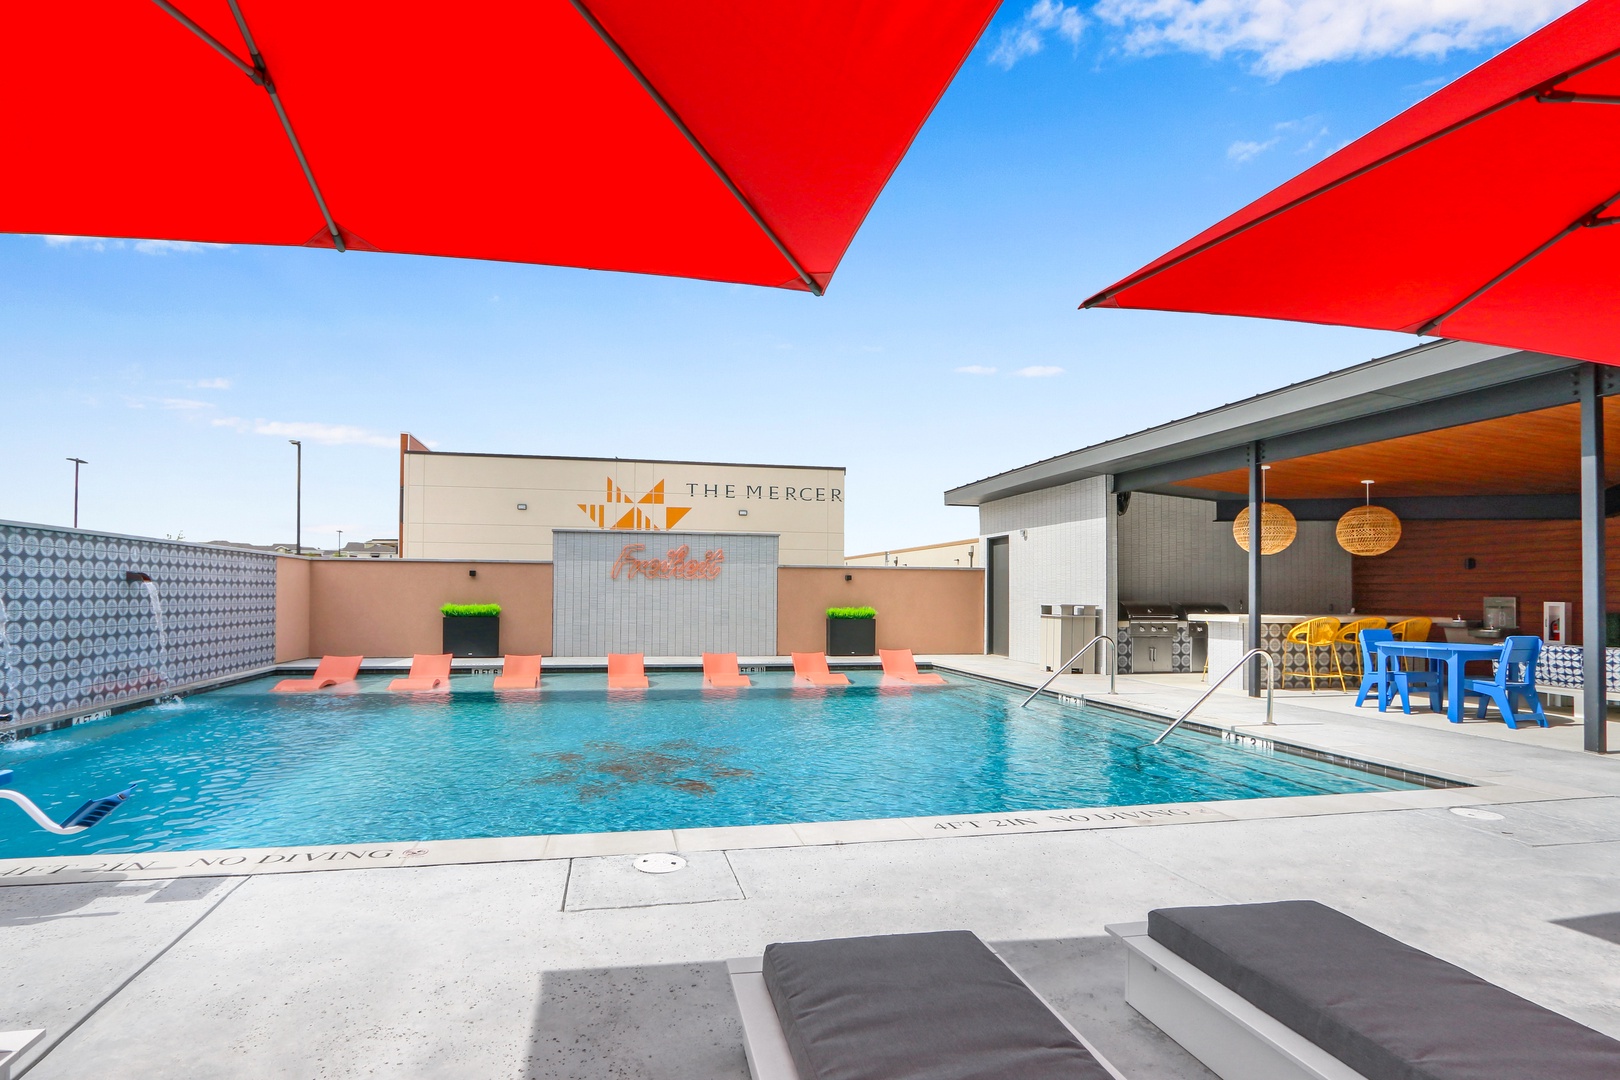 Kick back & relax or make a splash at the sparkling community pool!